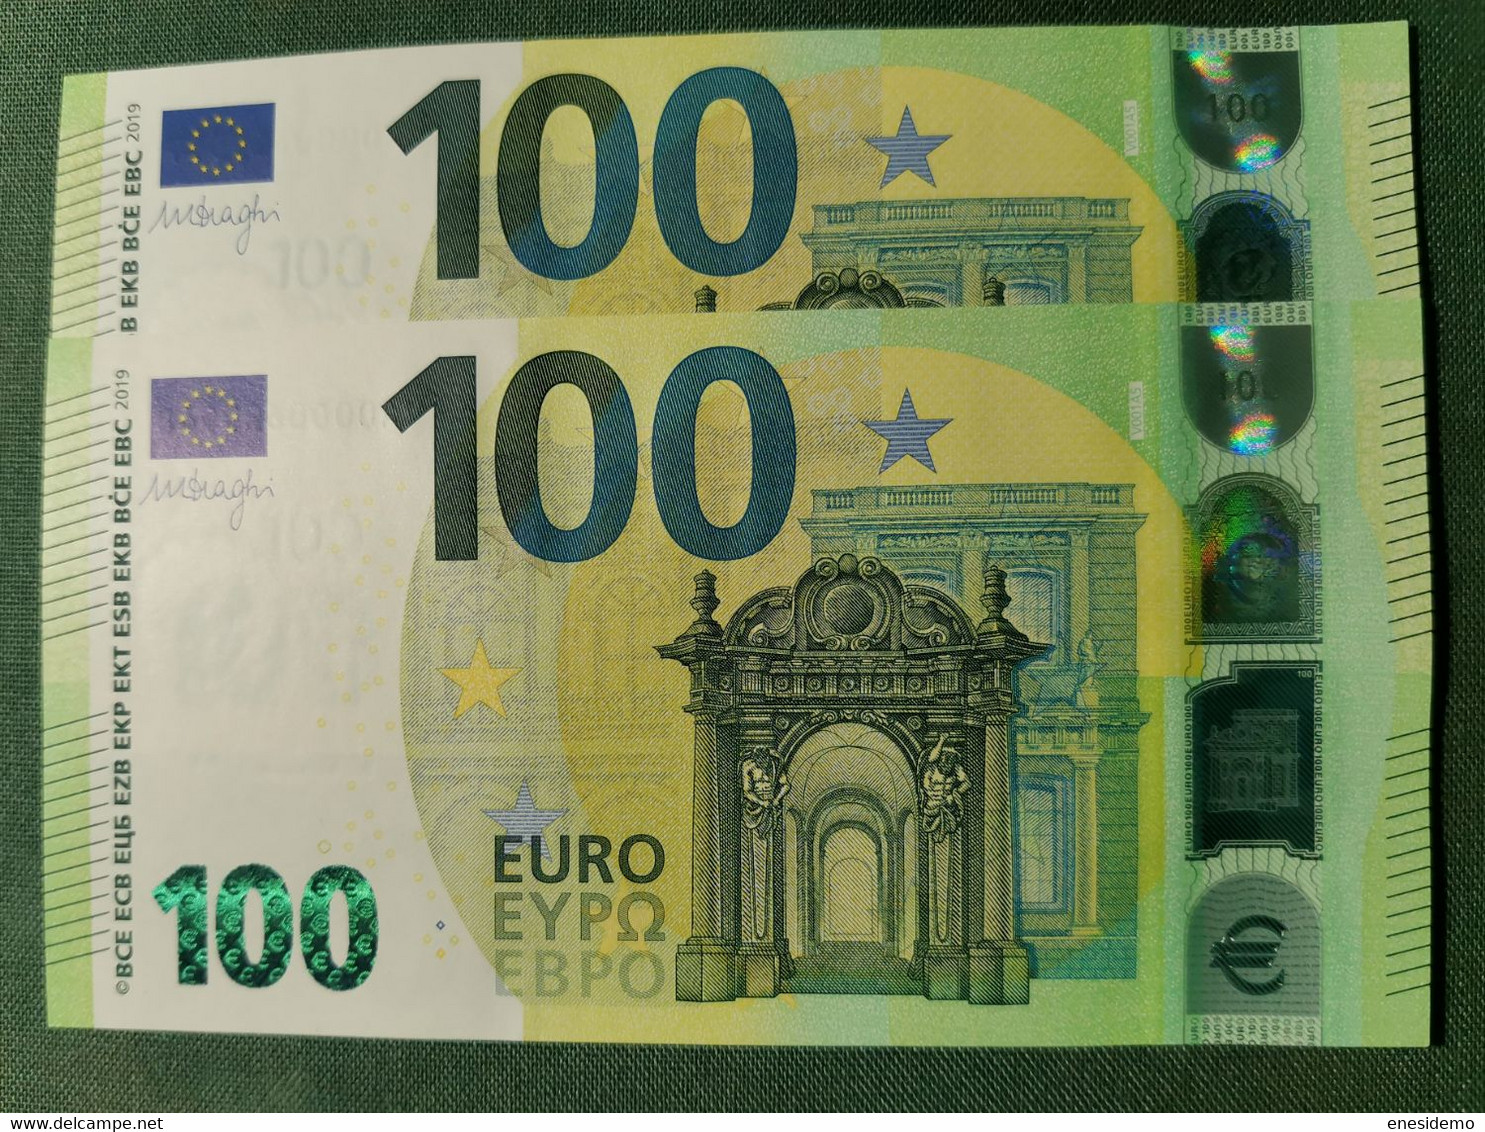 100 EURO SPAIN 2019 DRAGHI V001A5 VA0000 RARE VERY LOW SERIAL NUMBER CORRELATIVE COUPLE UNCIRCULATED PERFECT